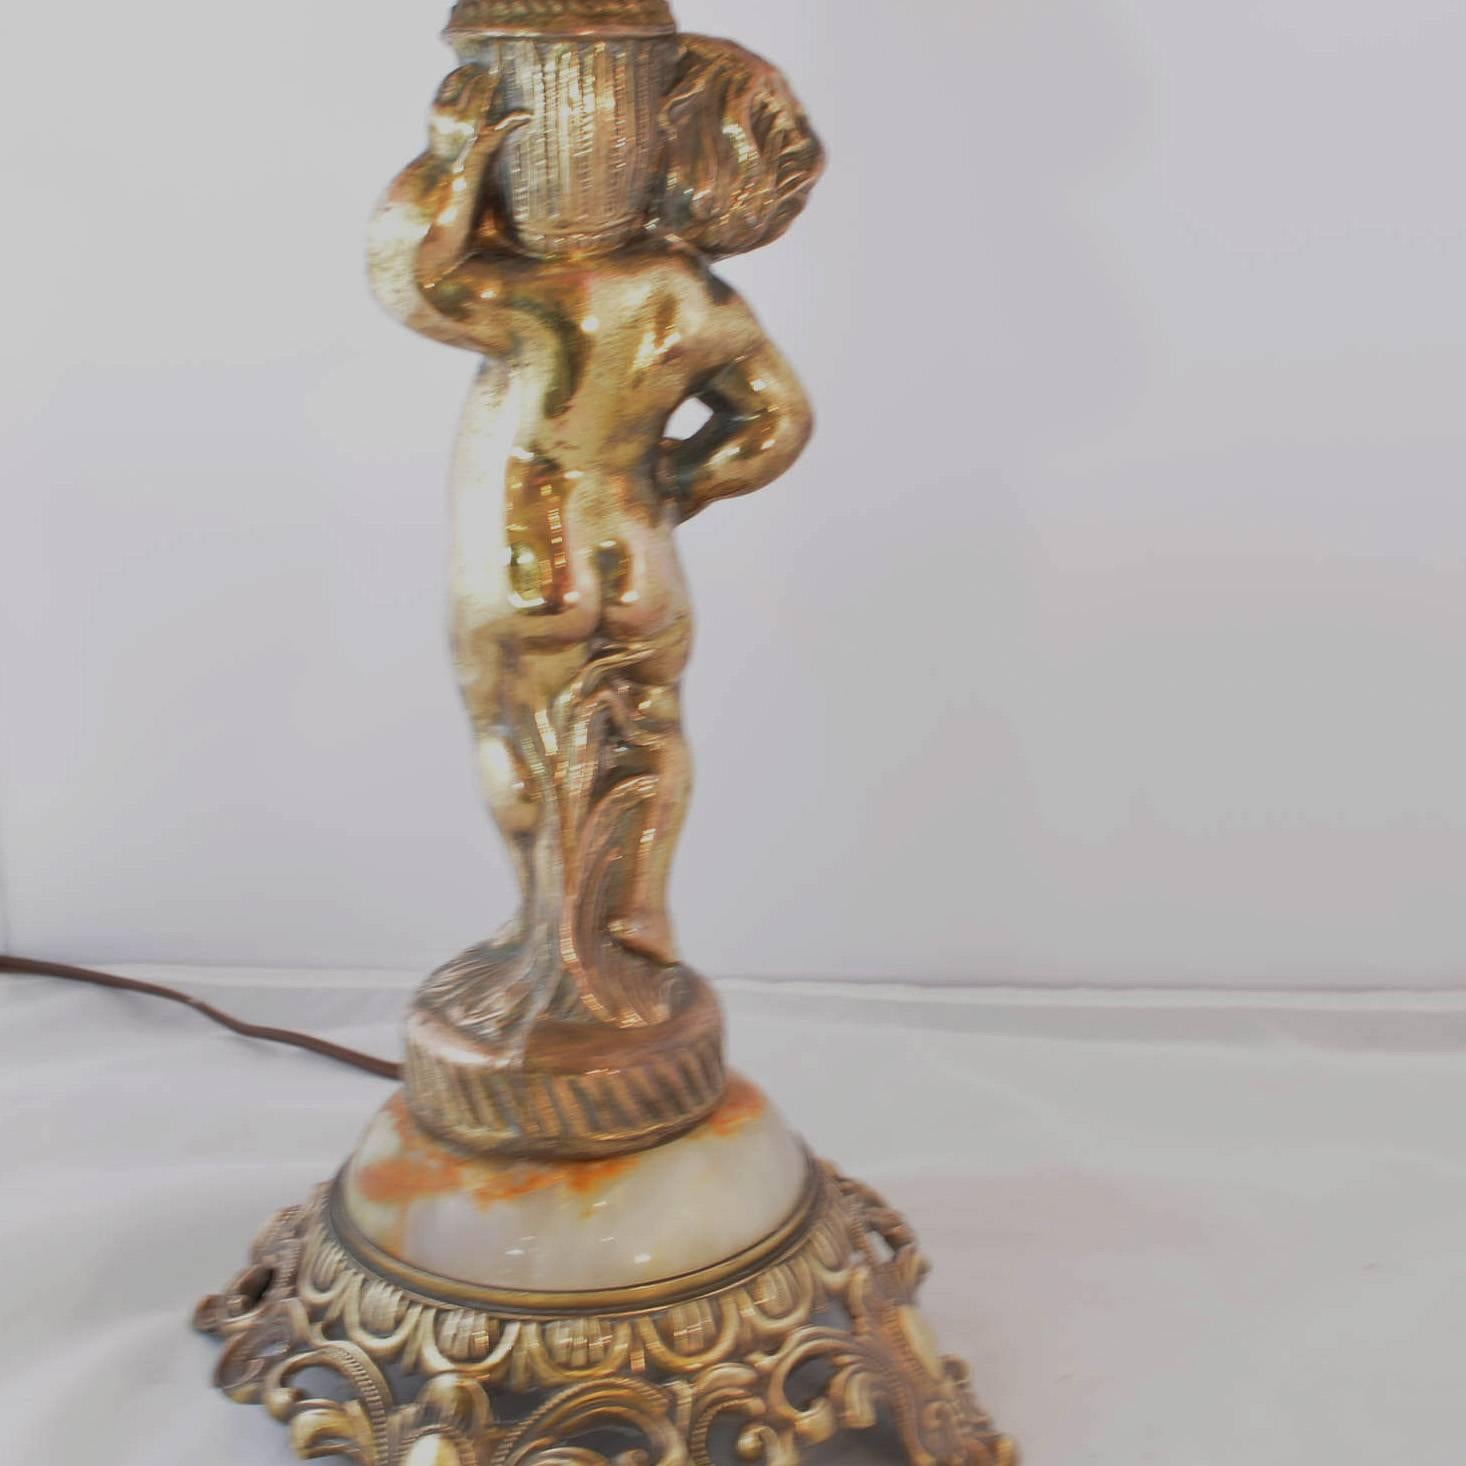 The putti holds an urn on his shoulder and sits atop a base of domed marble and cut metal base. When lit he has a warm golden glow. The charming shade has alternating panels of lace and gathered fabric with rosette centres. 

Dimensions: H 23